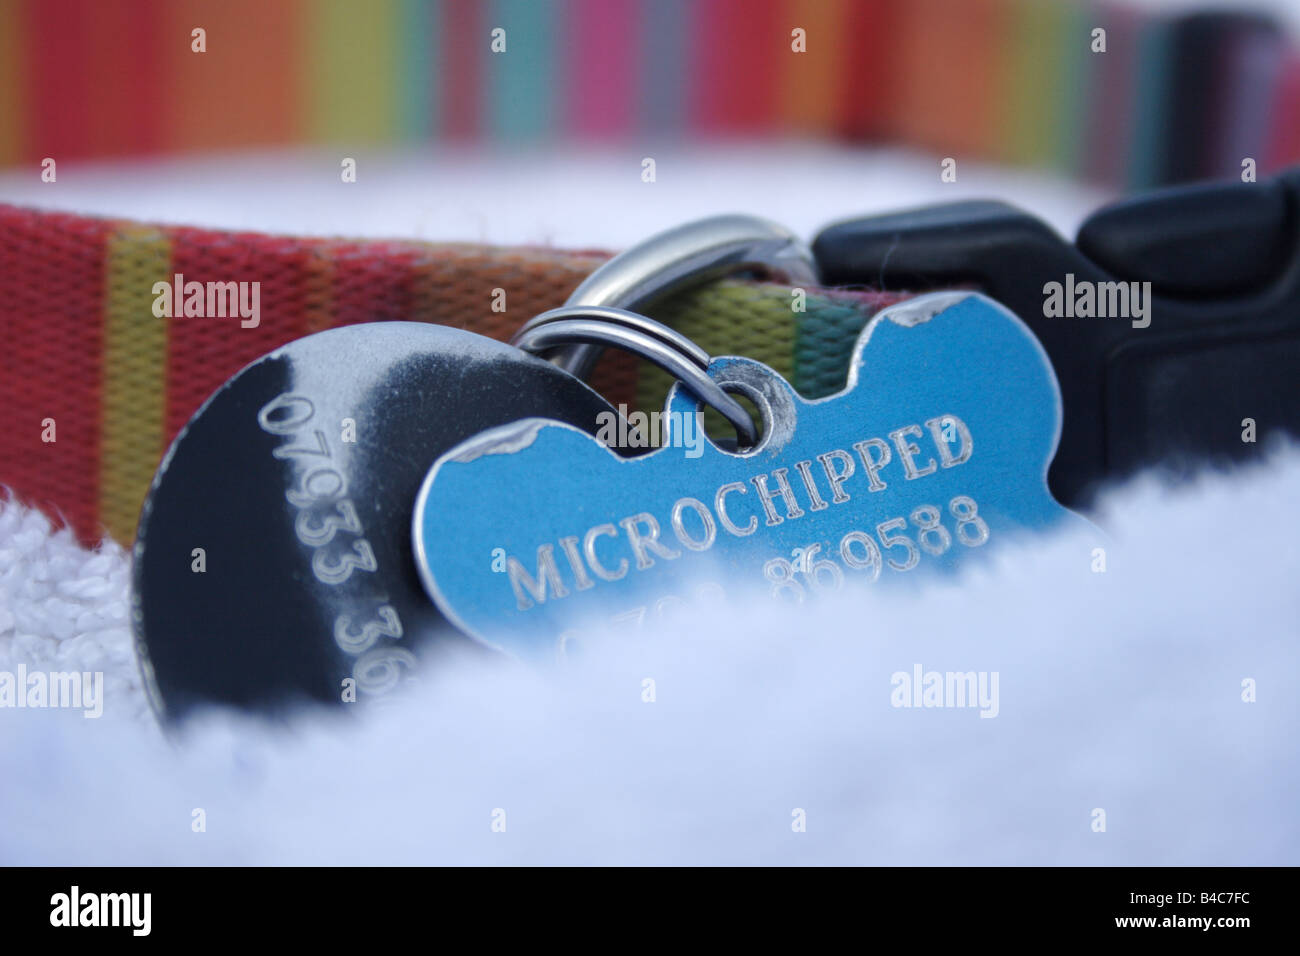 dog tag with microchip number engraved on it Stock Photo